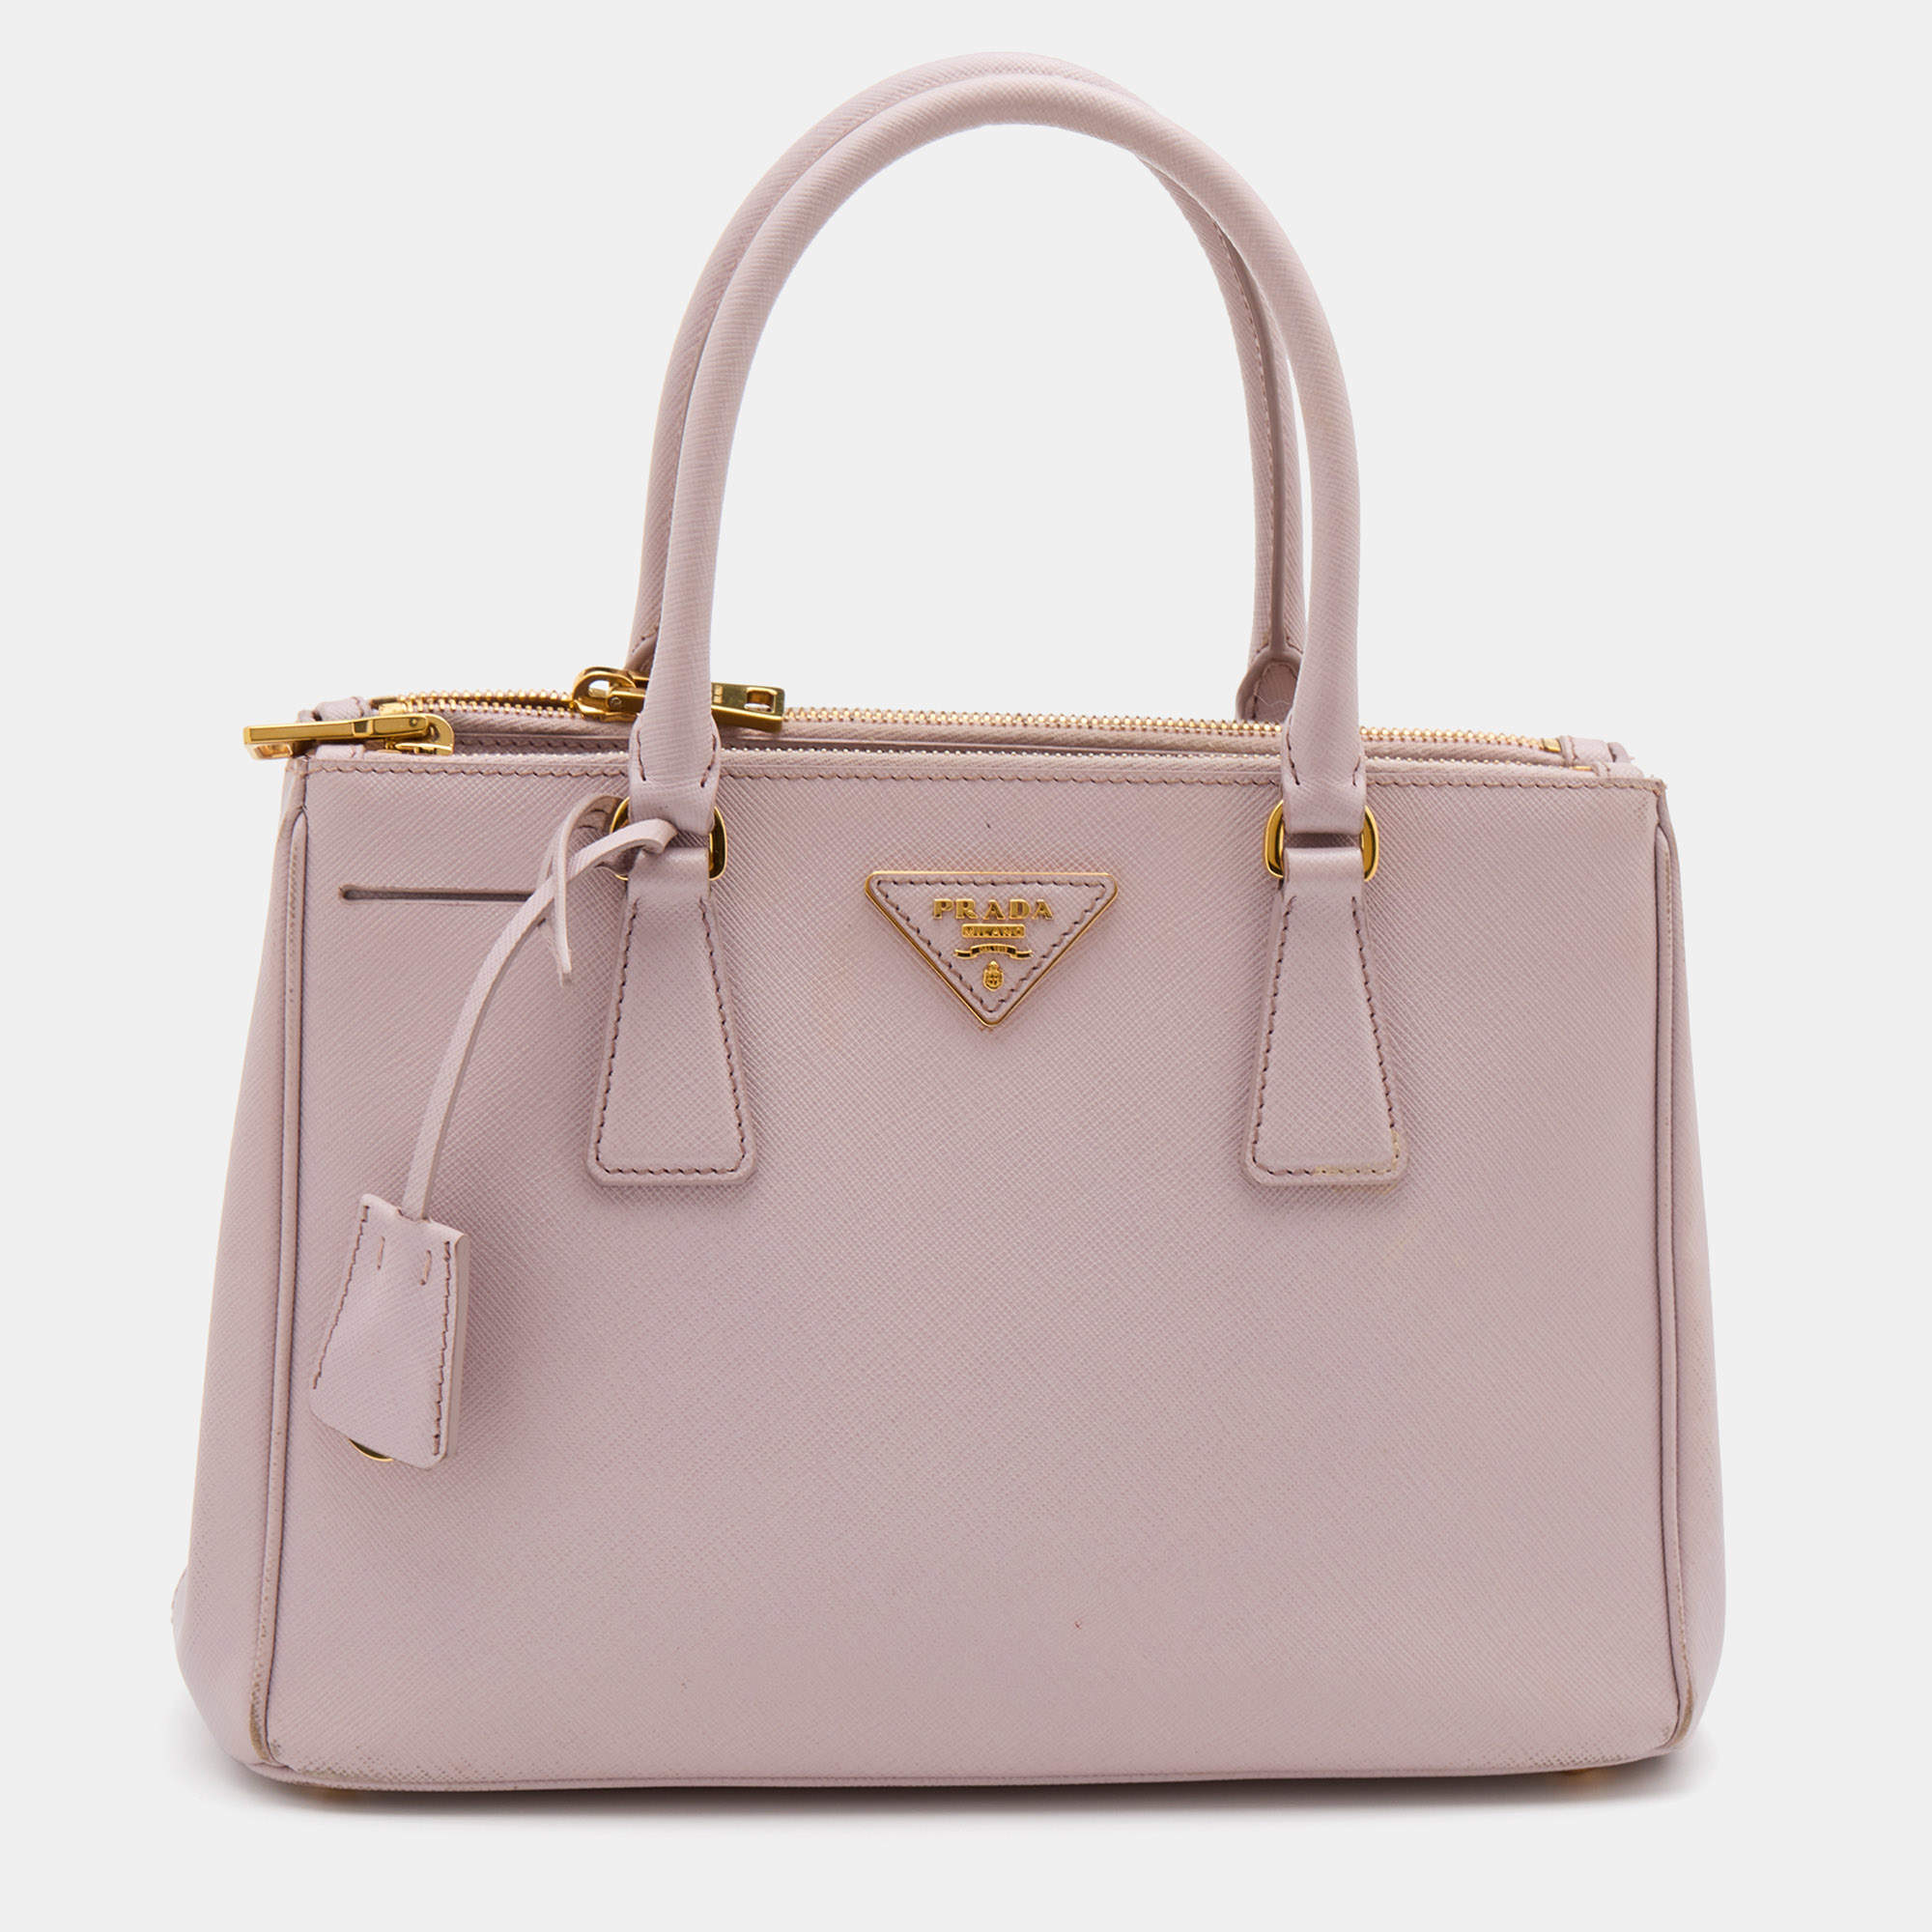 Prada Small Saffiano Leather Tote hang bag BN2567 Light Pink – BRANDS N BAGS